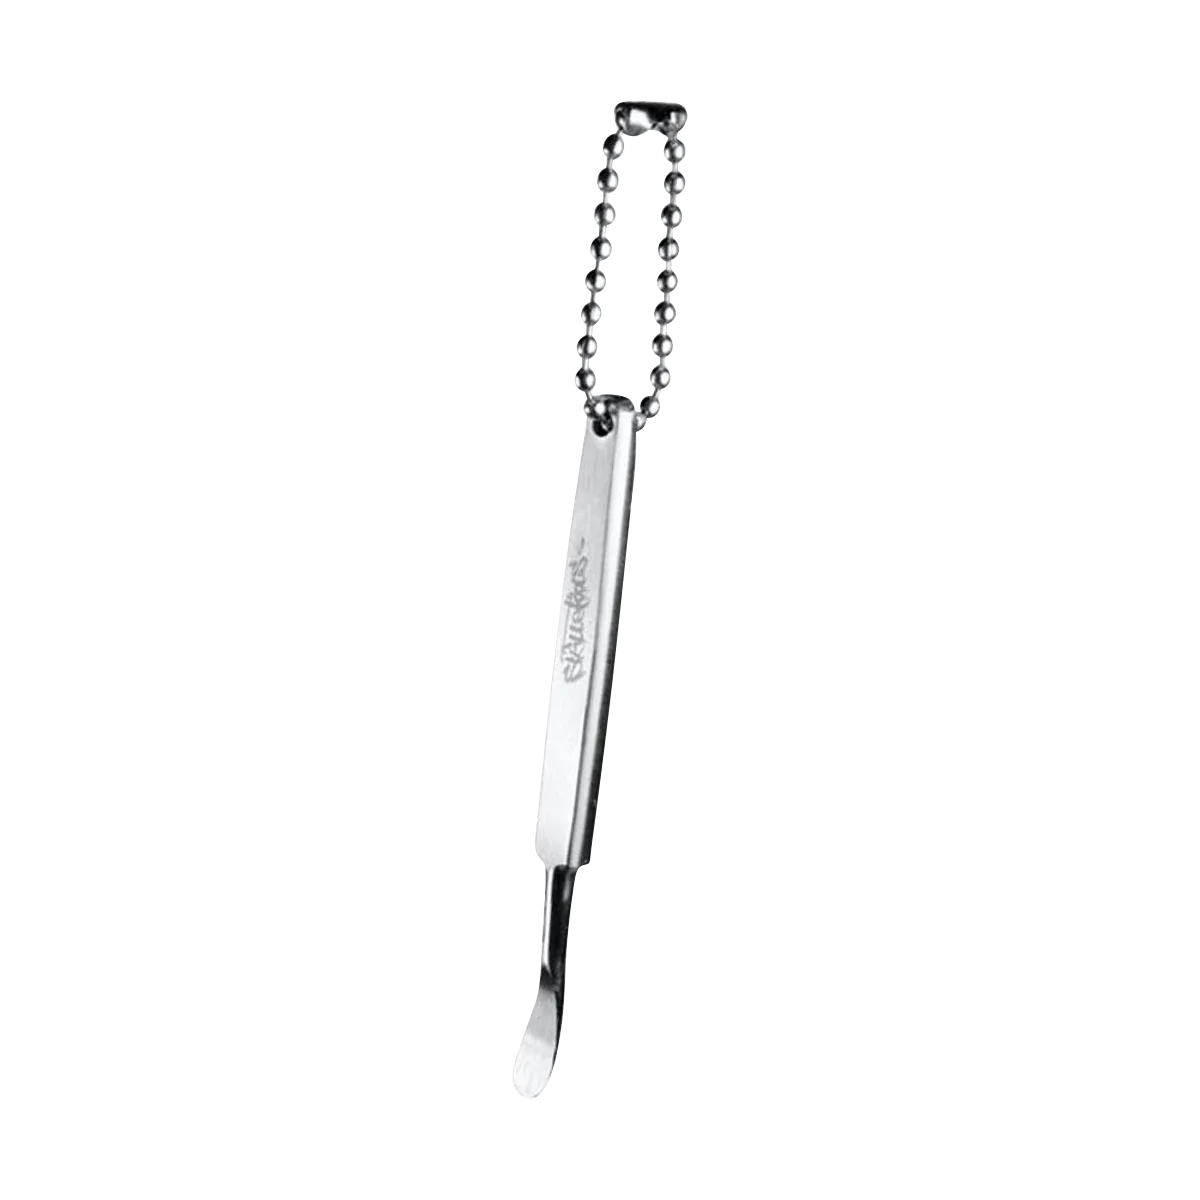 Skilletools Classic MINI Dab Tool with keychain, silver, compact design, side view